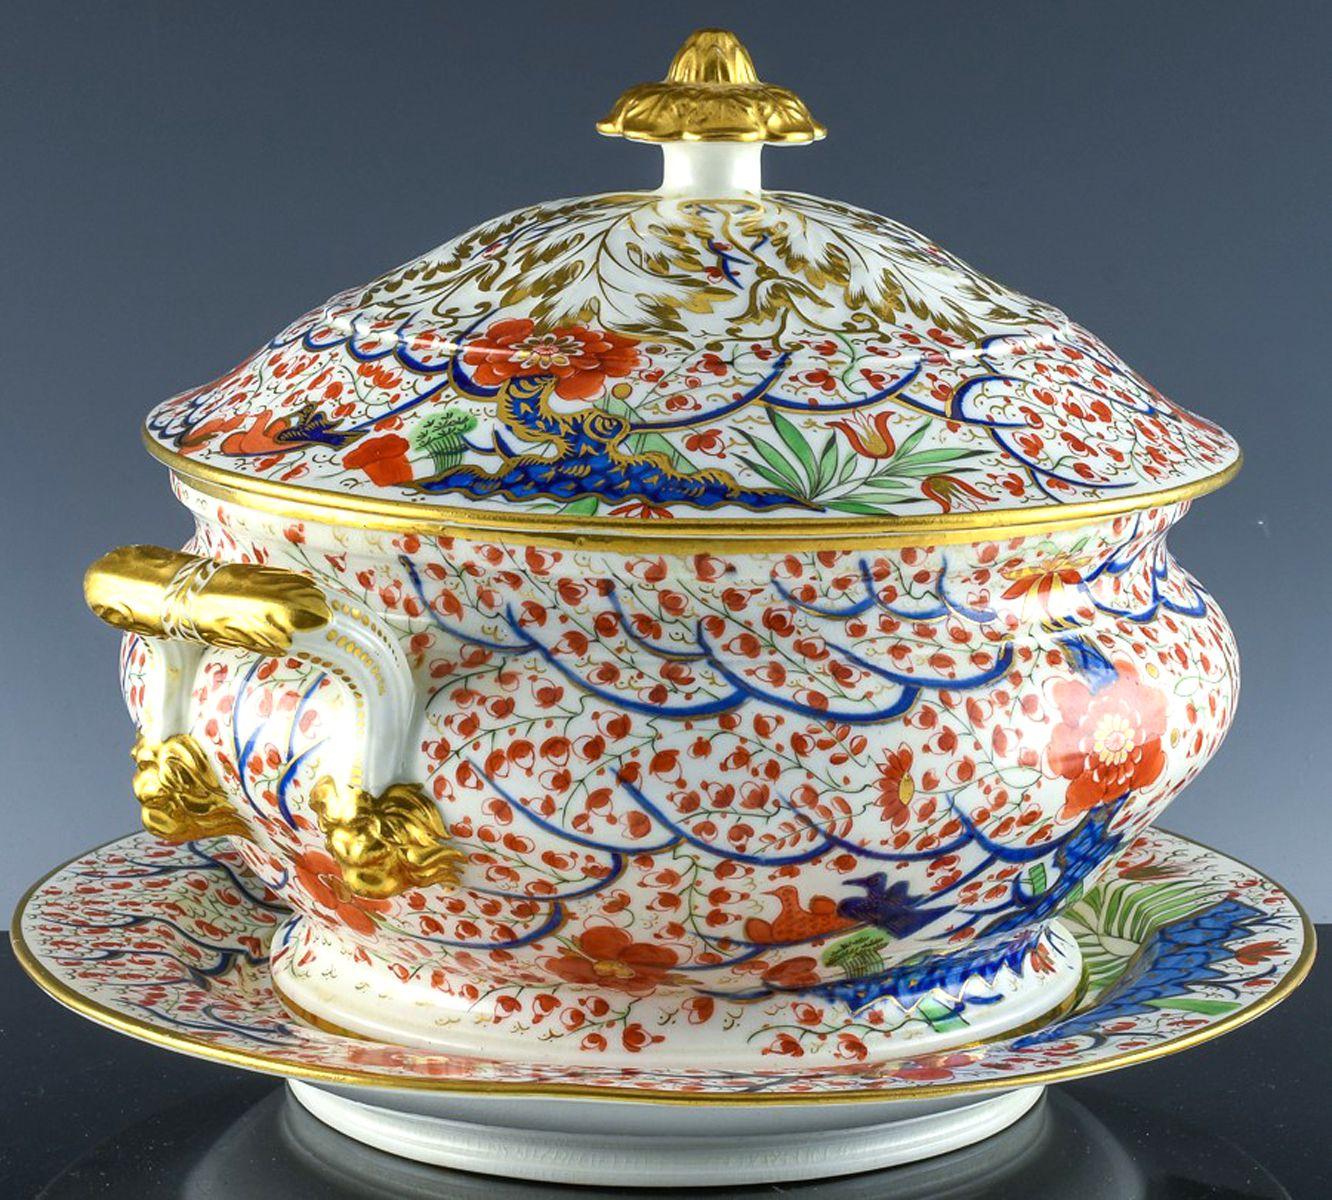 19th Century Regency Period Chamberlain Worcester Porcelain Soup Tureen, Cover and Stand For Sale